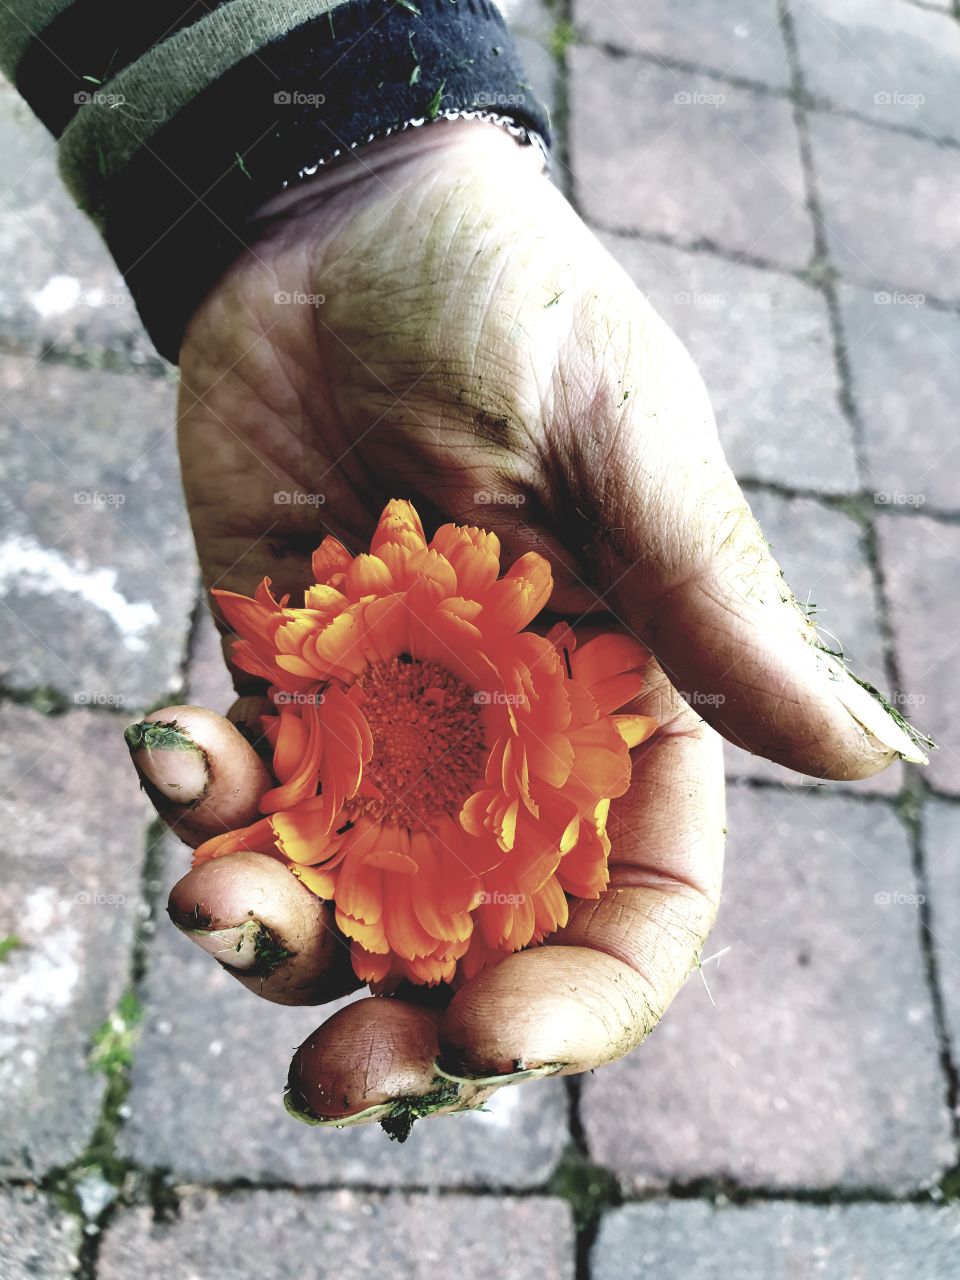 A flower in my hand.